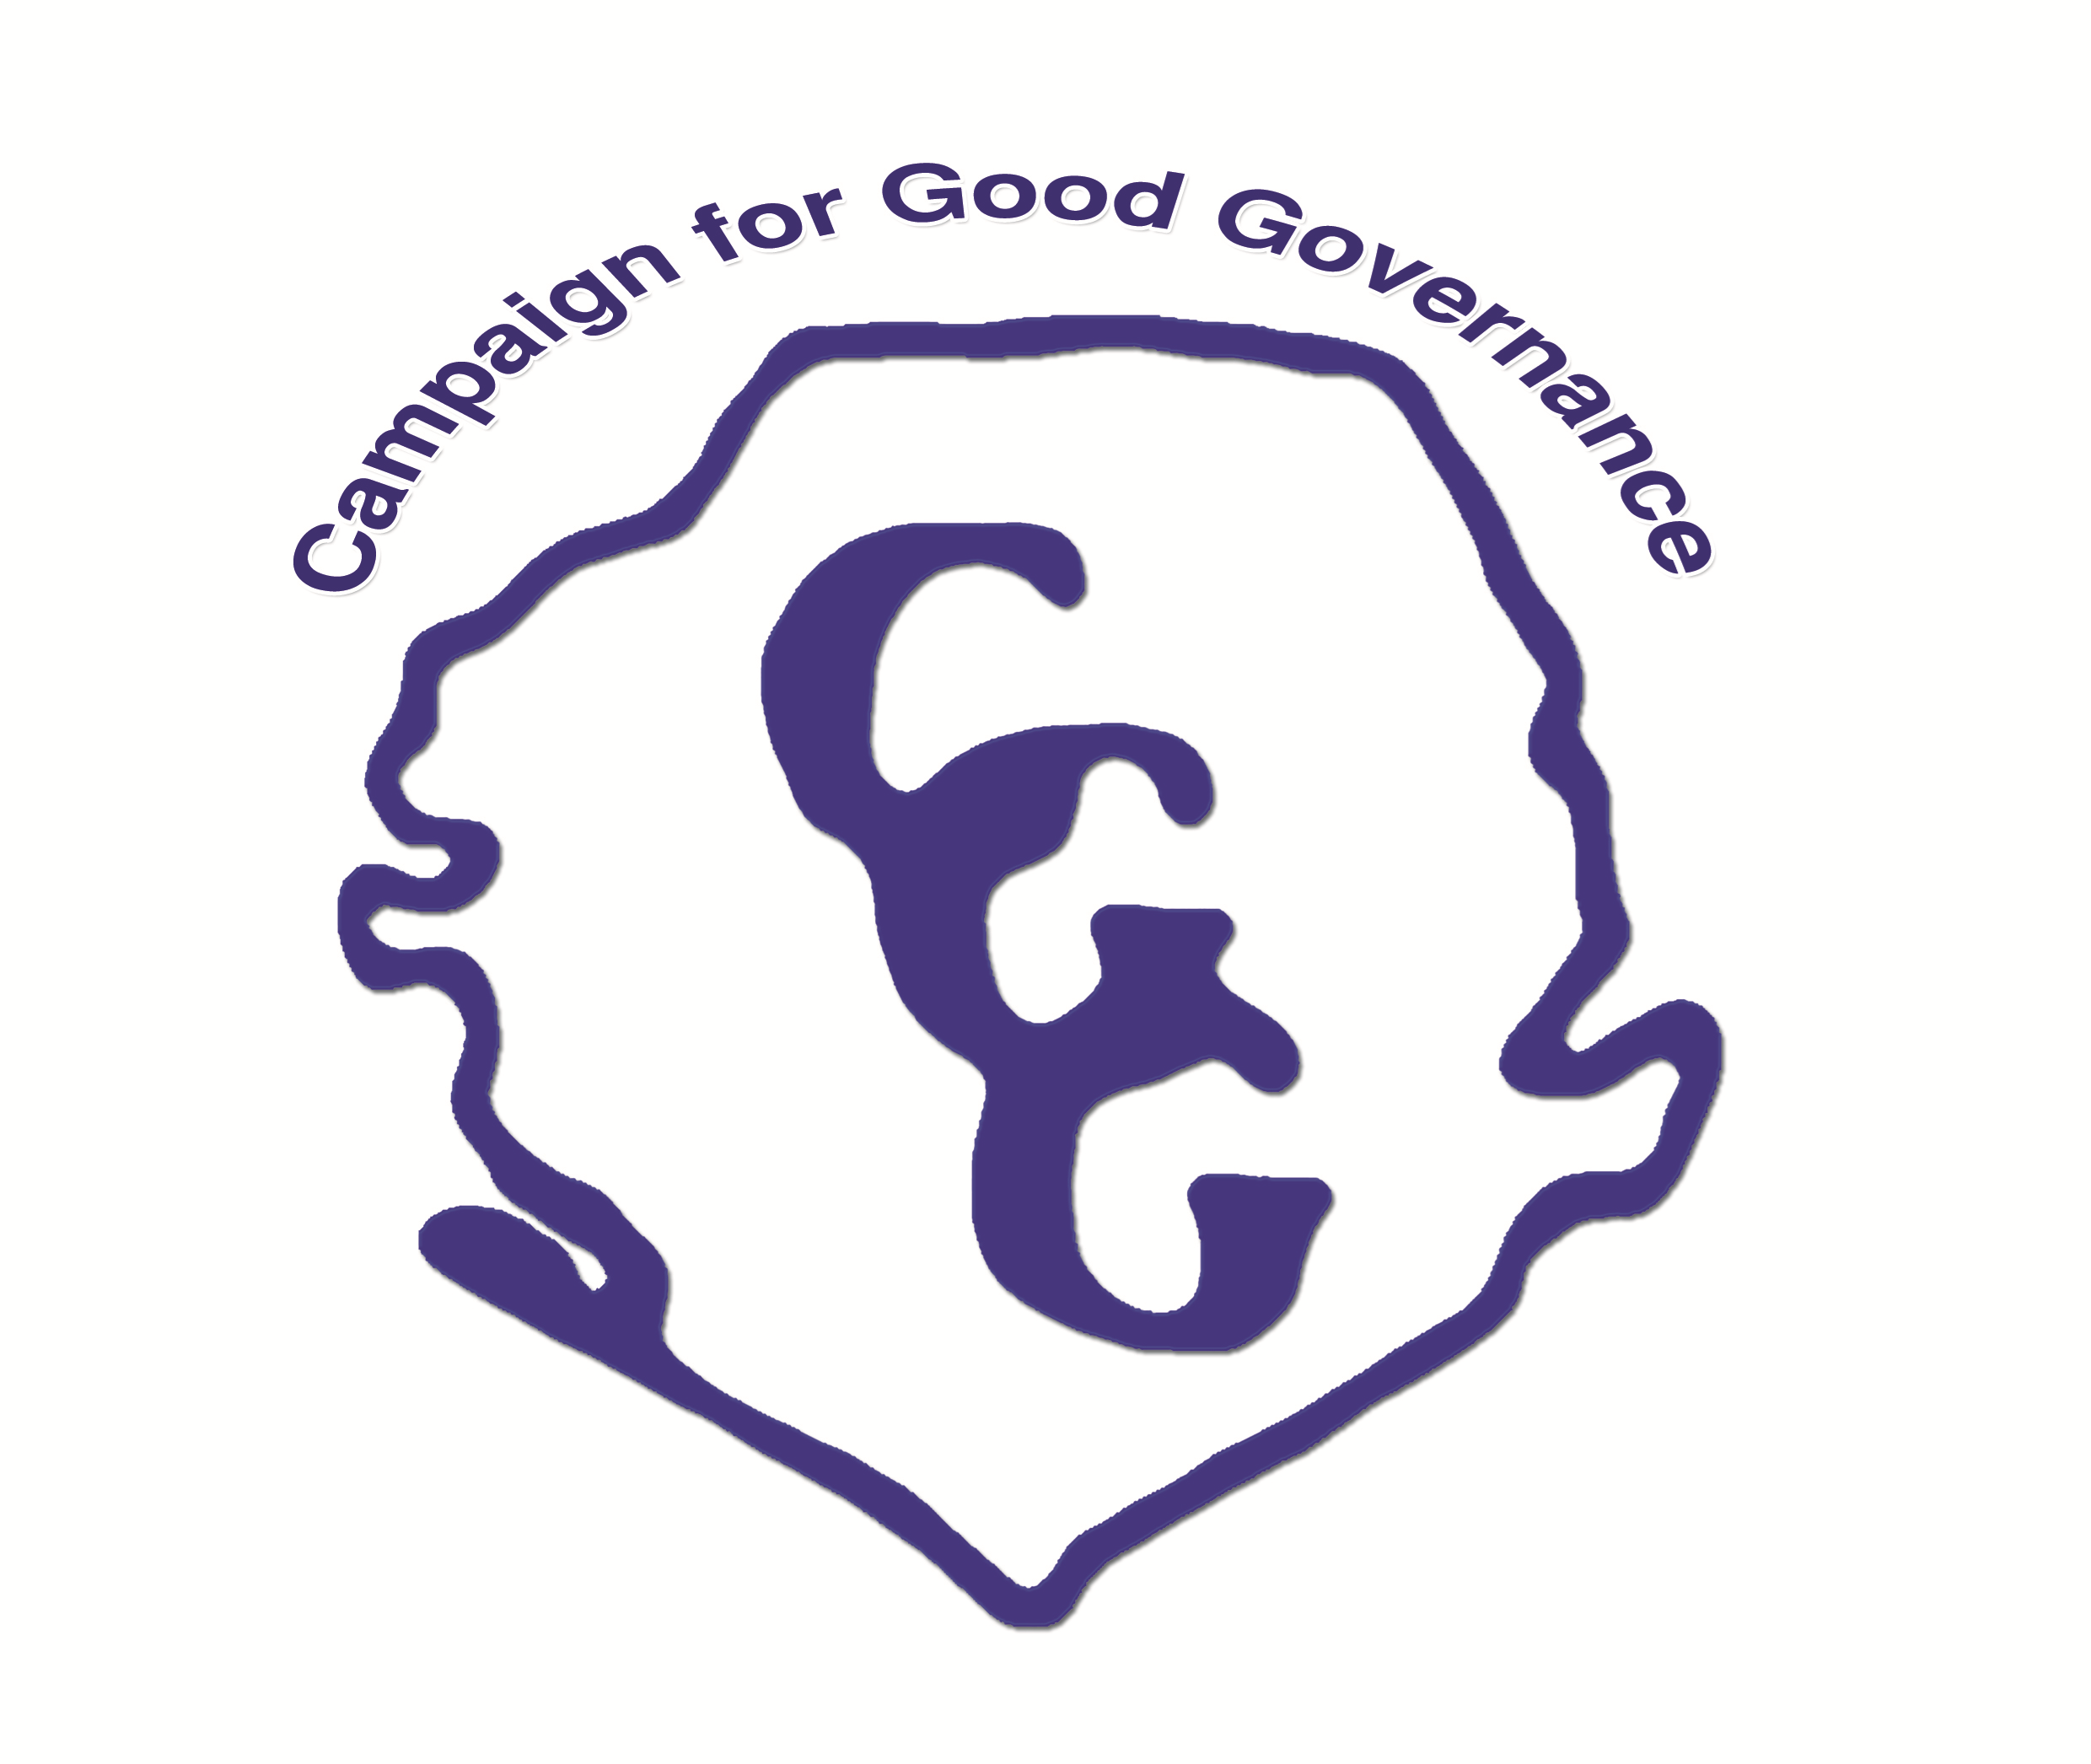 Campaign for Good Governance (CGG)